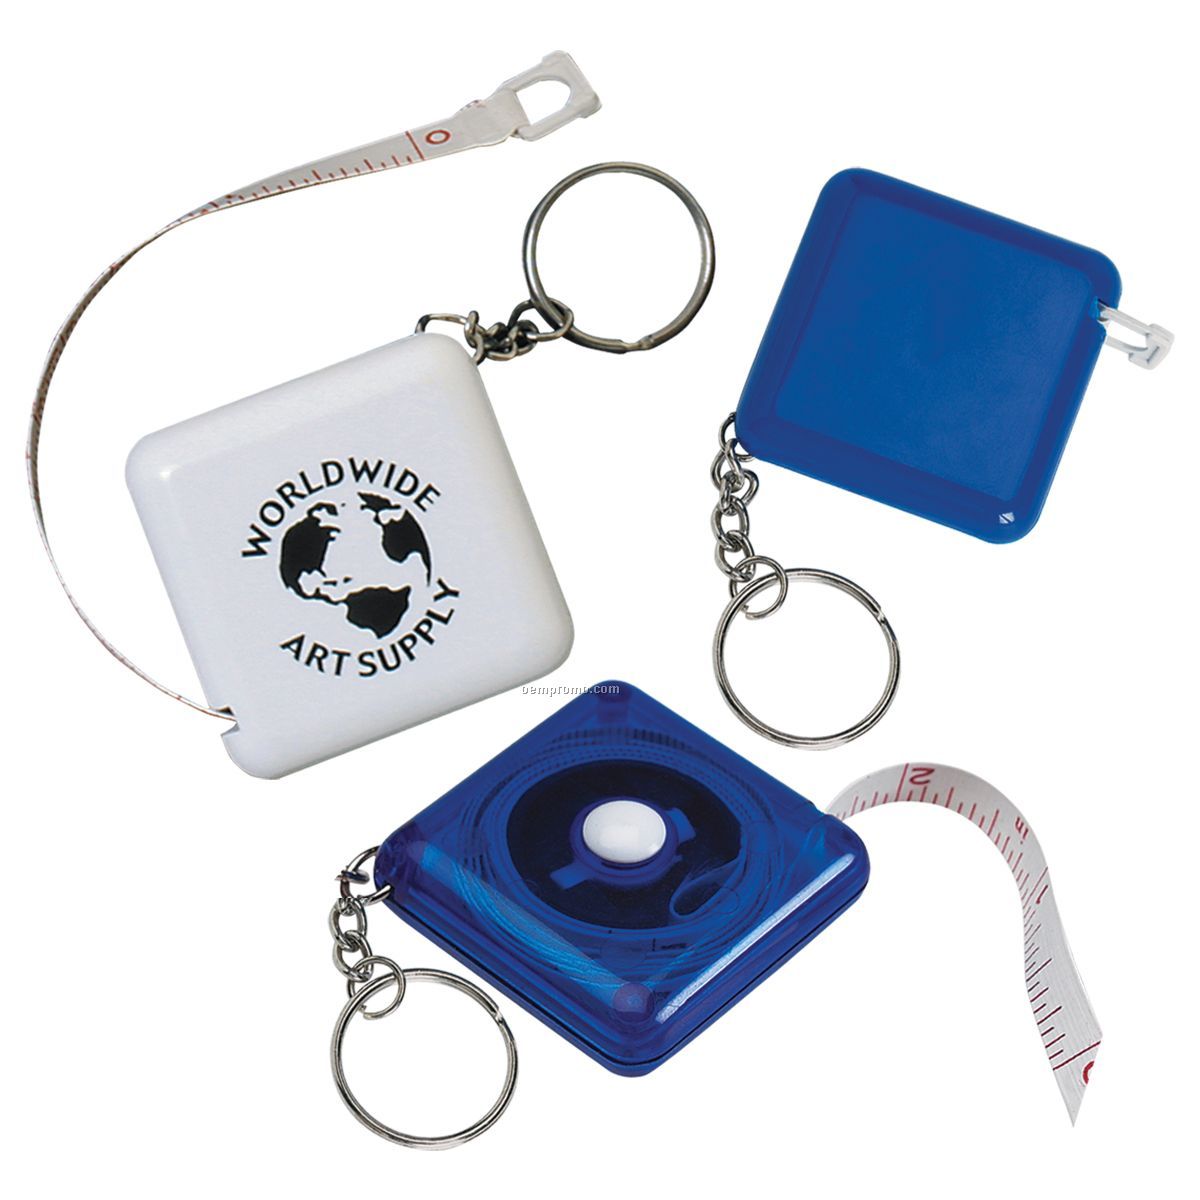 Tape-a-matic Measuring Tape W/ Key Tag